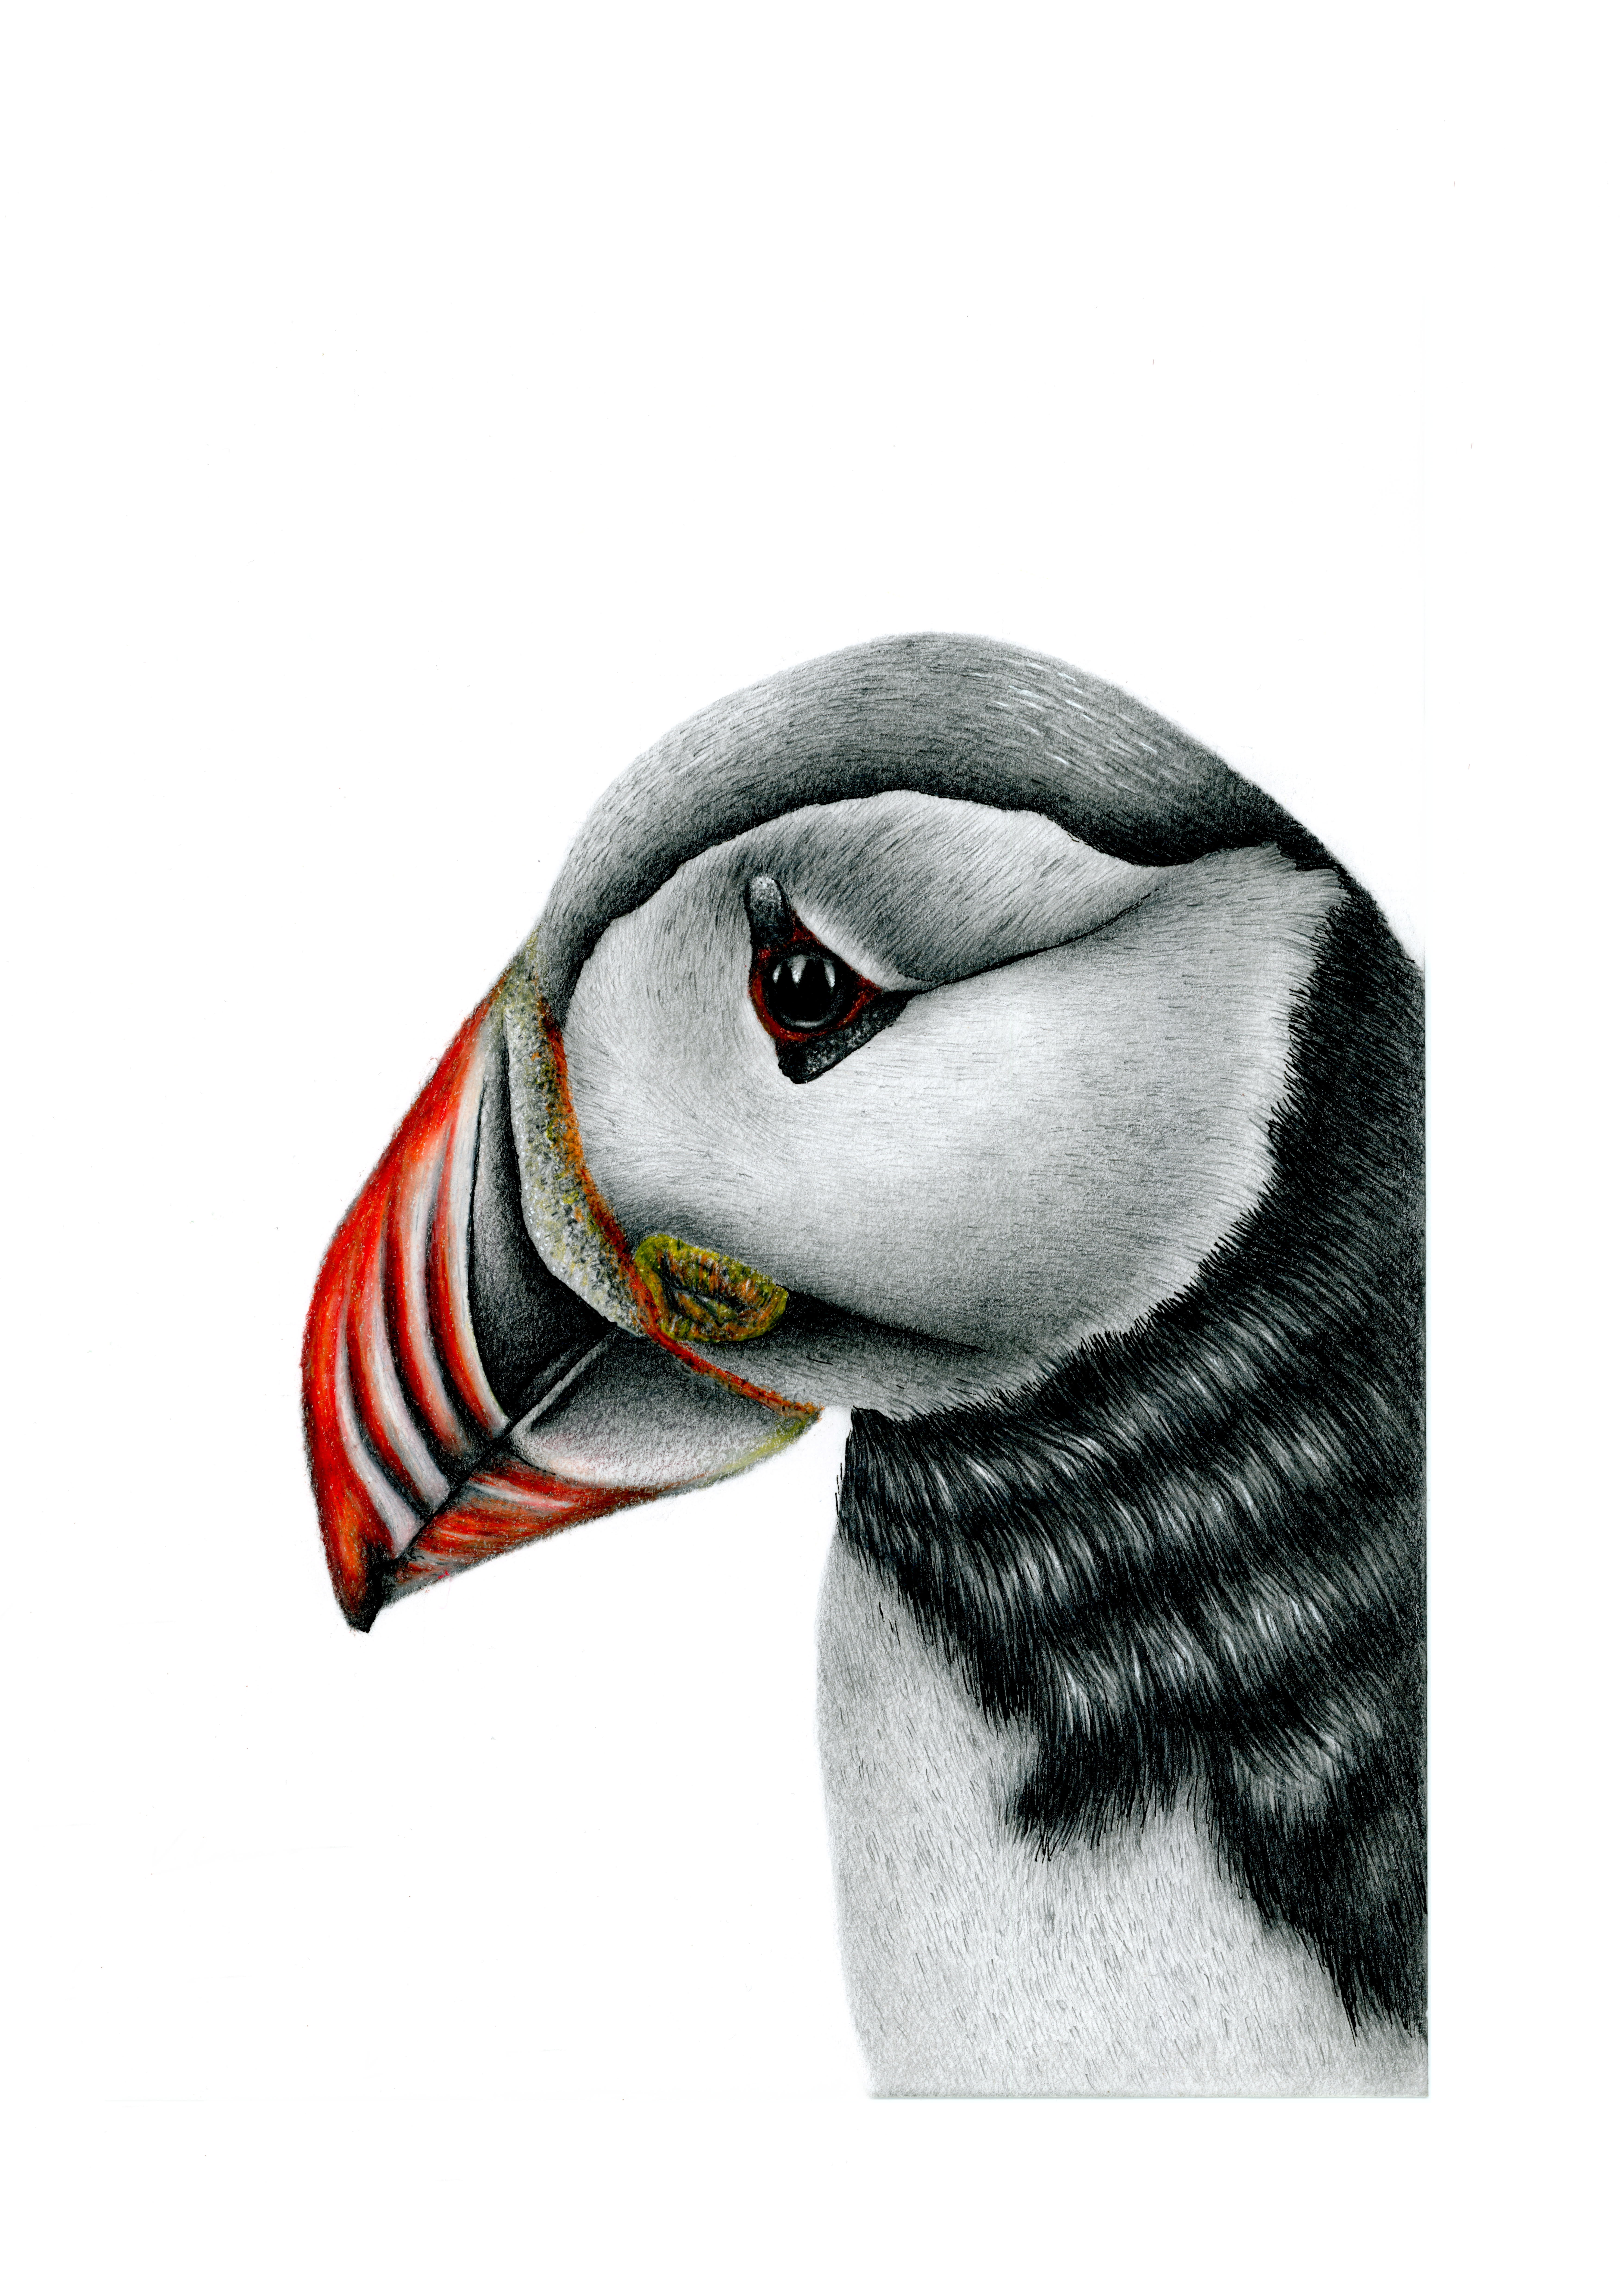 Red Puffin by Victoria Amos, in pencil